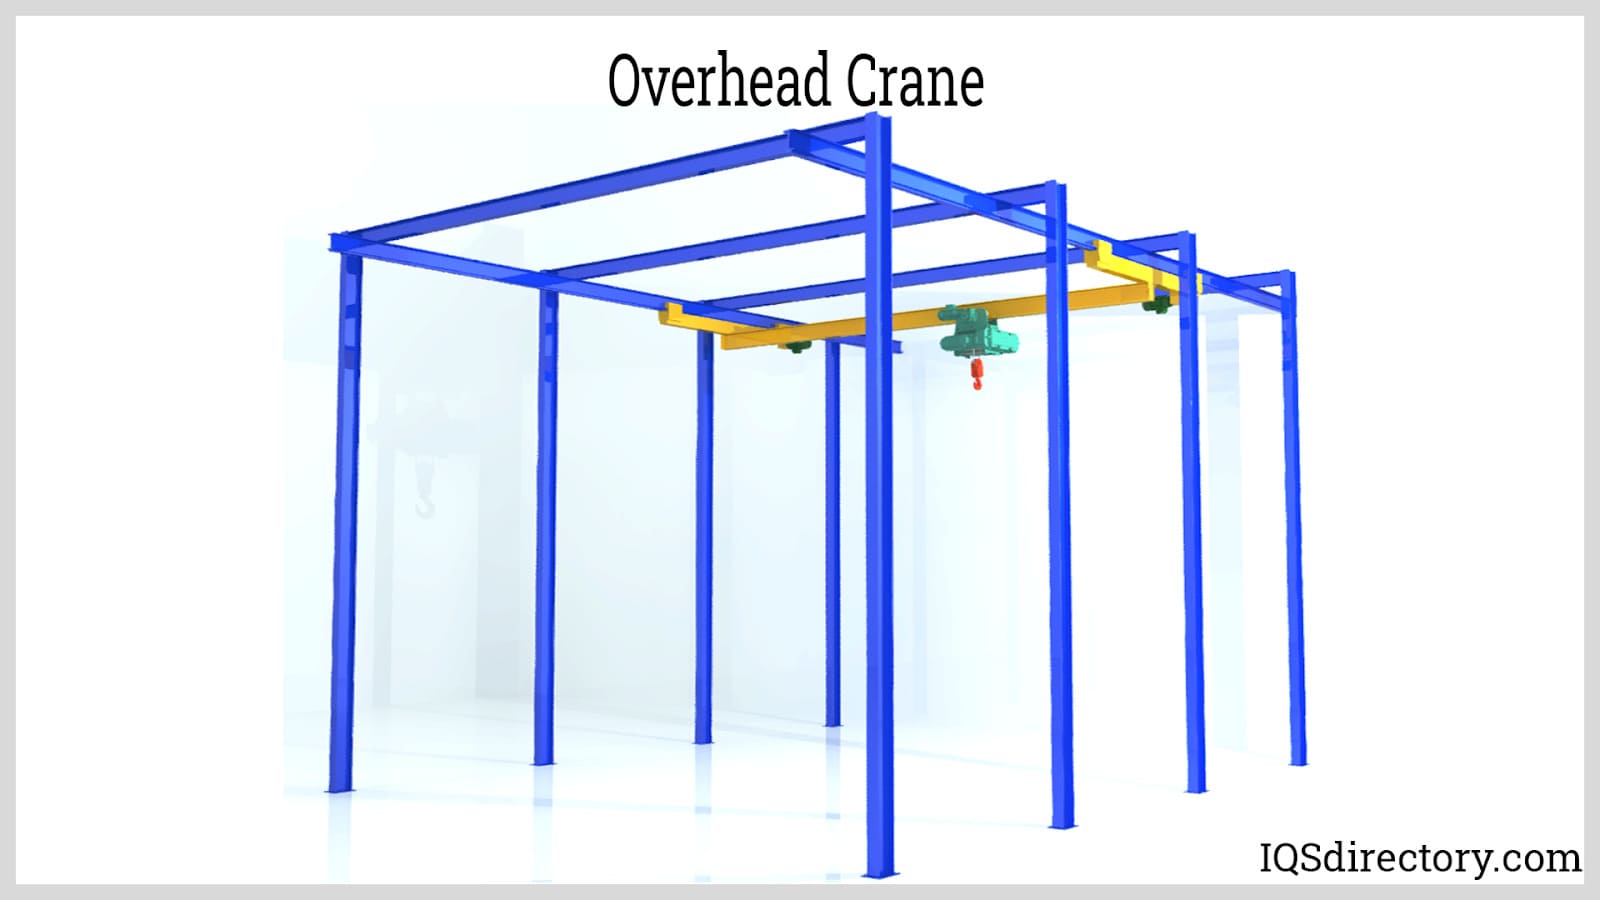 Explaining Crane Duty Cycles: What Are They And Why Should Users